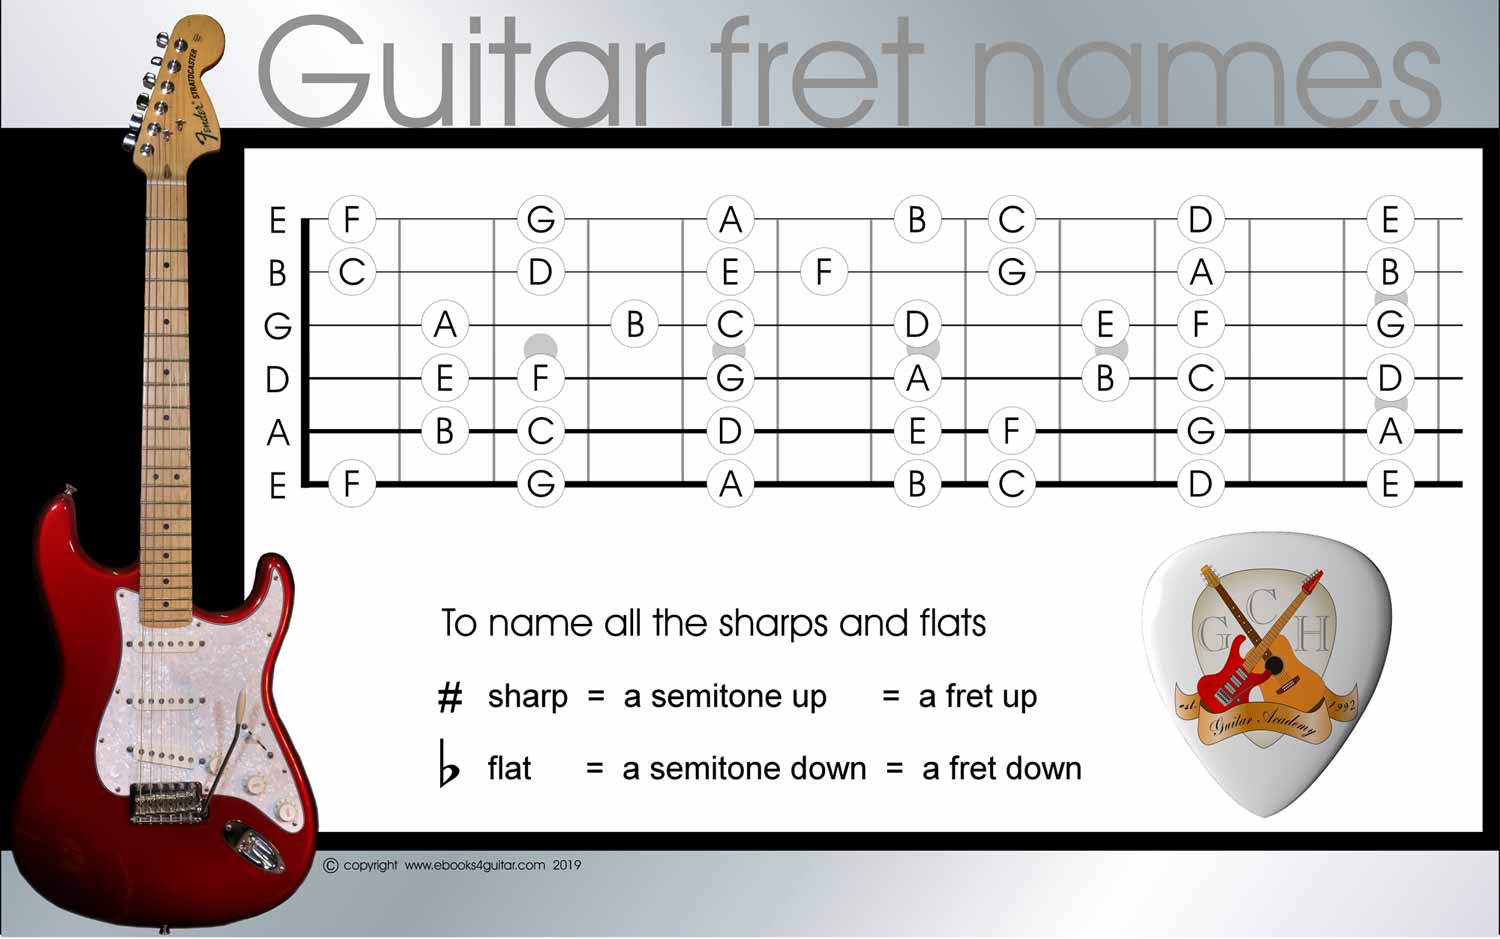 learn-to-name-all-the-frets-on-the-guitar-in-easy-steps-memorize-the